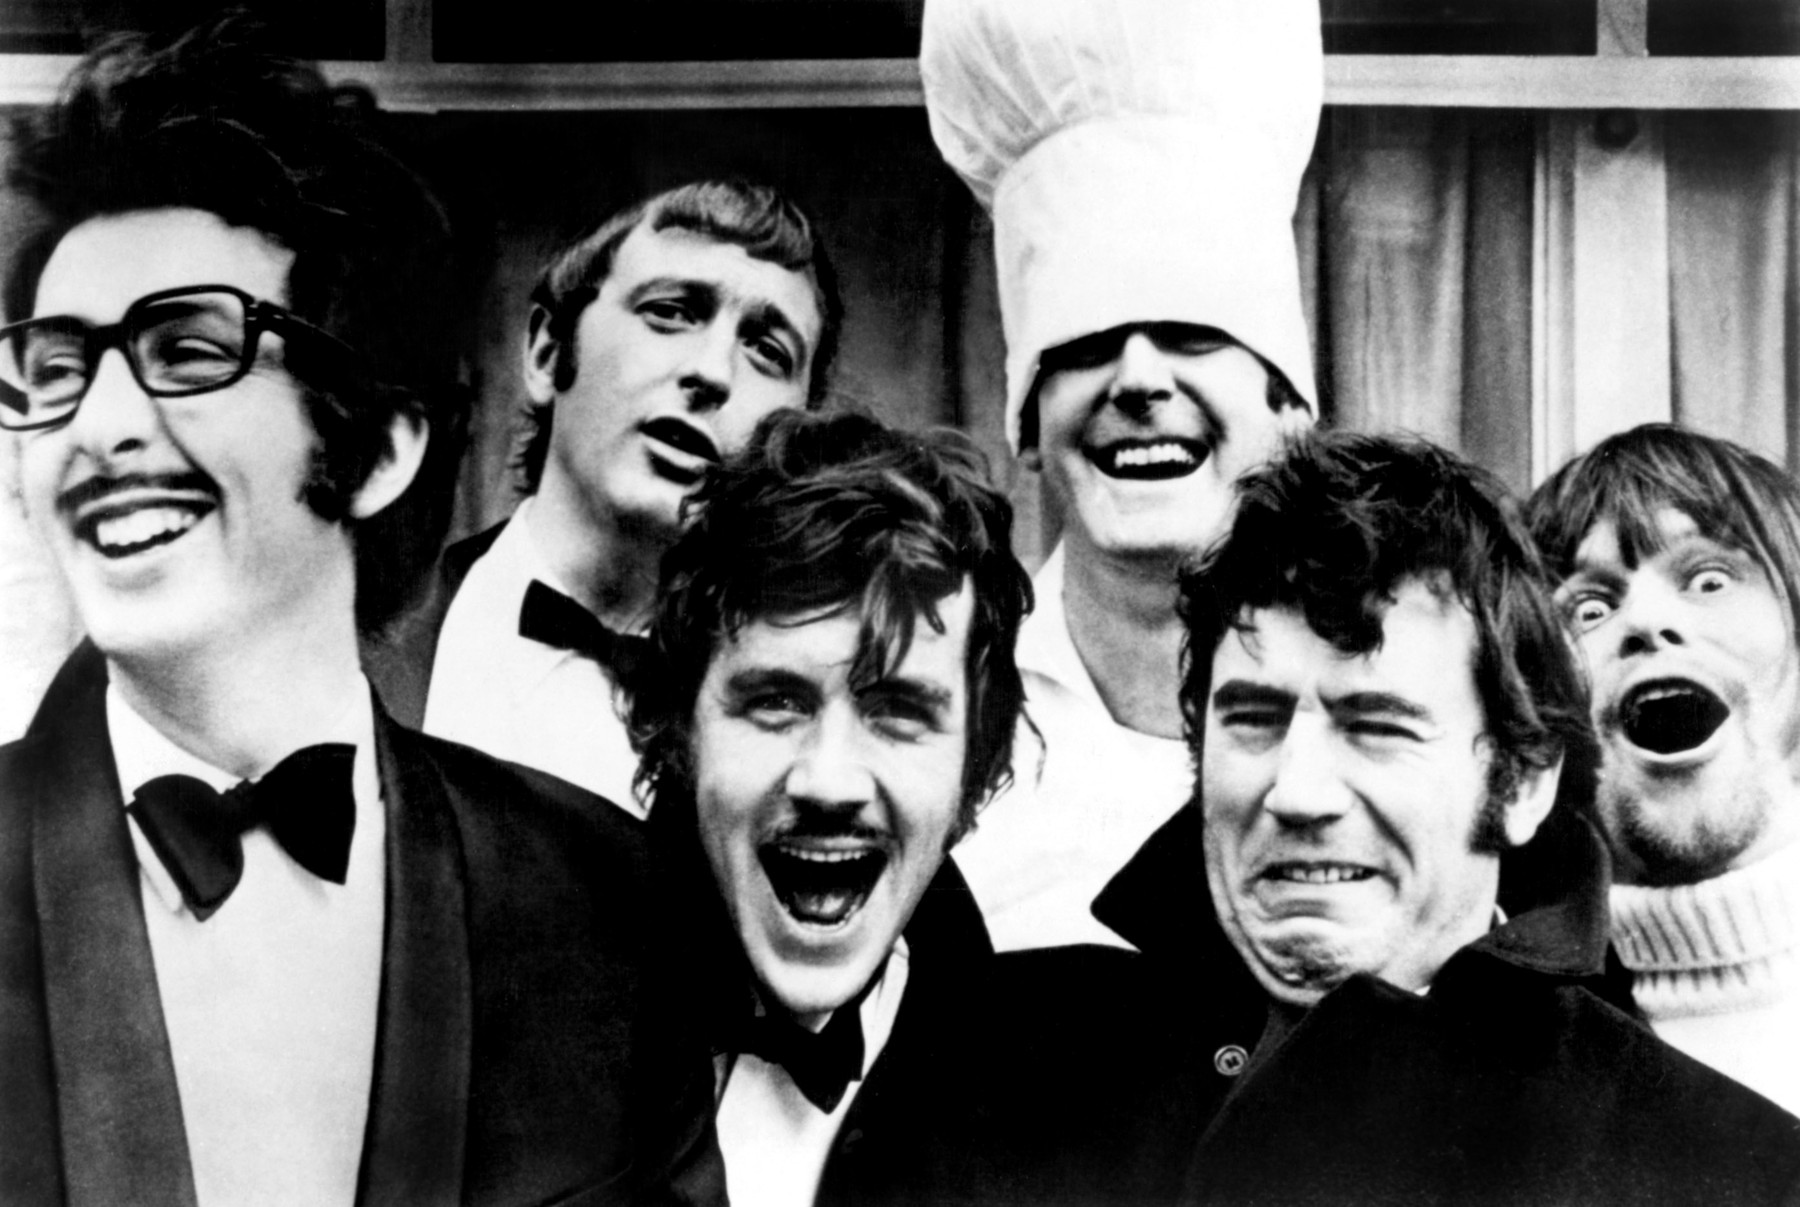 MONTY PYTHON'S FLYING CIRCUS, Eric Idle, Graham Chapman, Michael Palin, John Cleese, Terry Jones, Terry Gilliam, 1969-74, Image: 98946685, License: Rights-managed, Restrictions: For usage credit please use; Courtesy Everett Collection, Model Release: no, Credit line: Courtesy Everett Collection / Everett / Profimedia